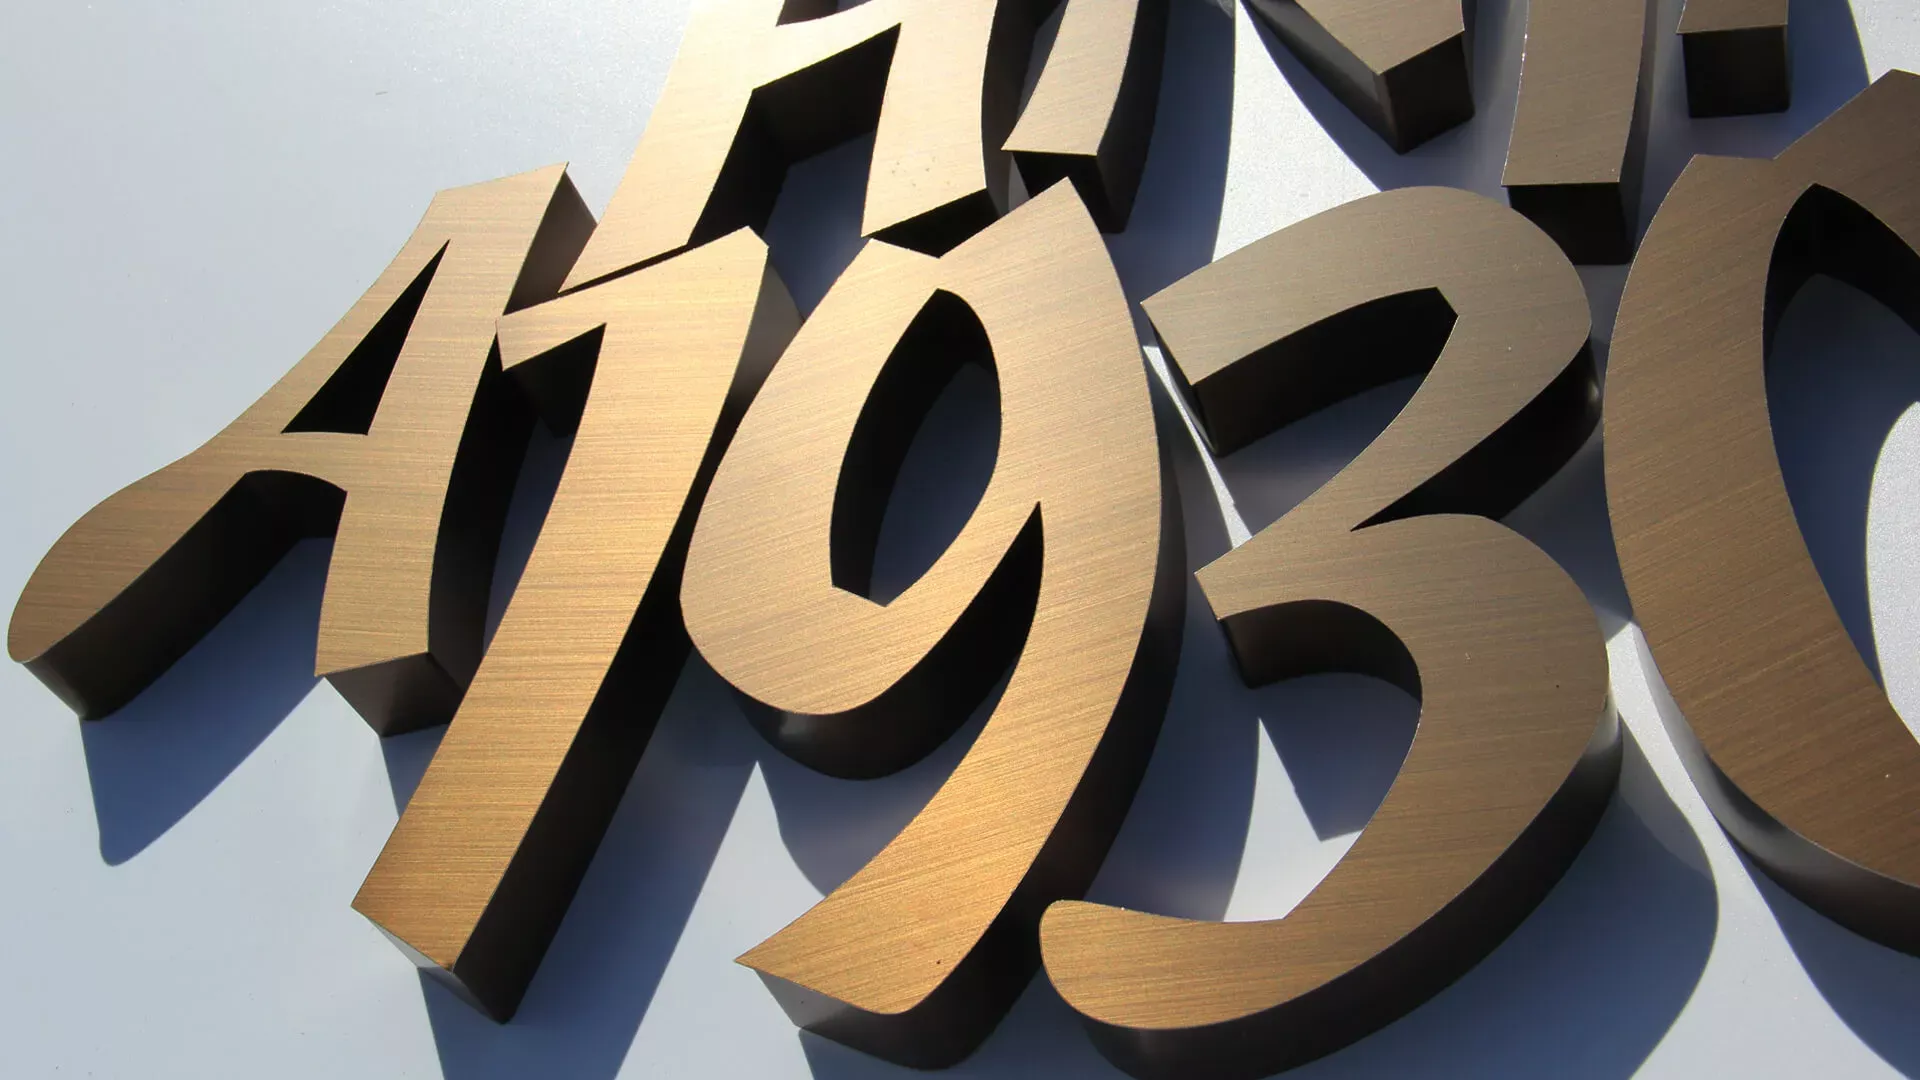 A1930 - Numbers and letters made of stainless steel in brushed bronze.